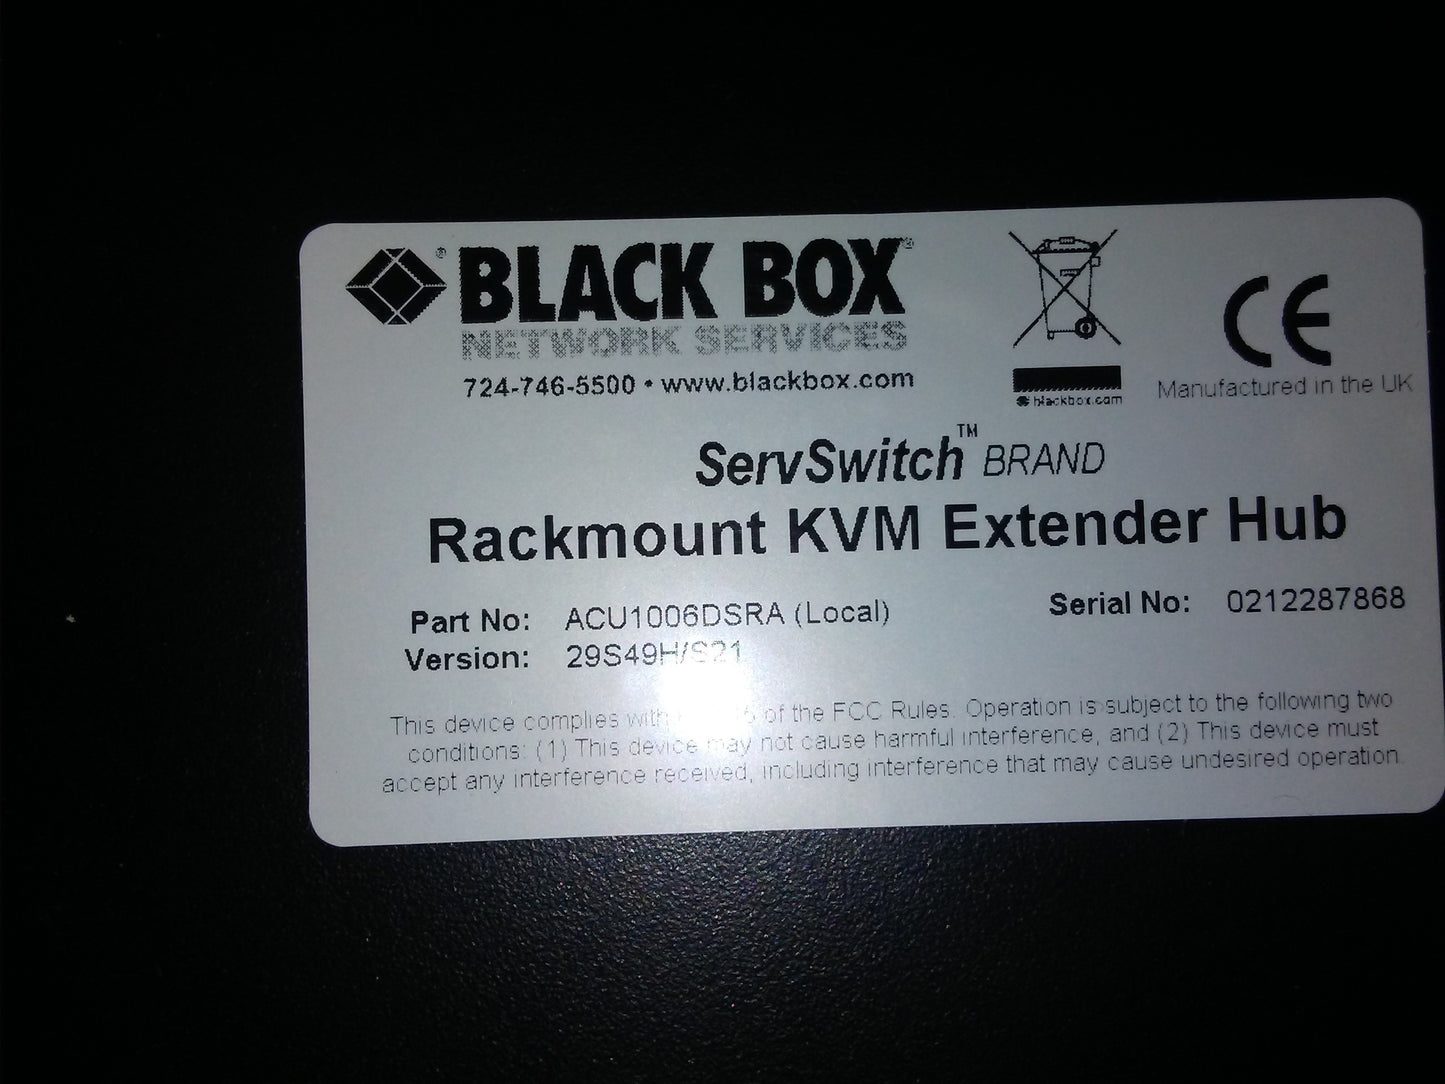 6-PORT DUAL ACCESS RACKMOUNT SERVSWITCH CAT5 KVM EXTENDER HUB WITH SERIAL